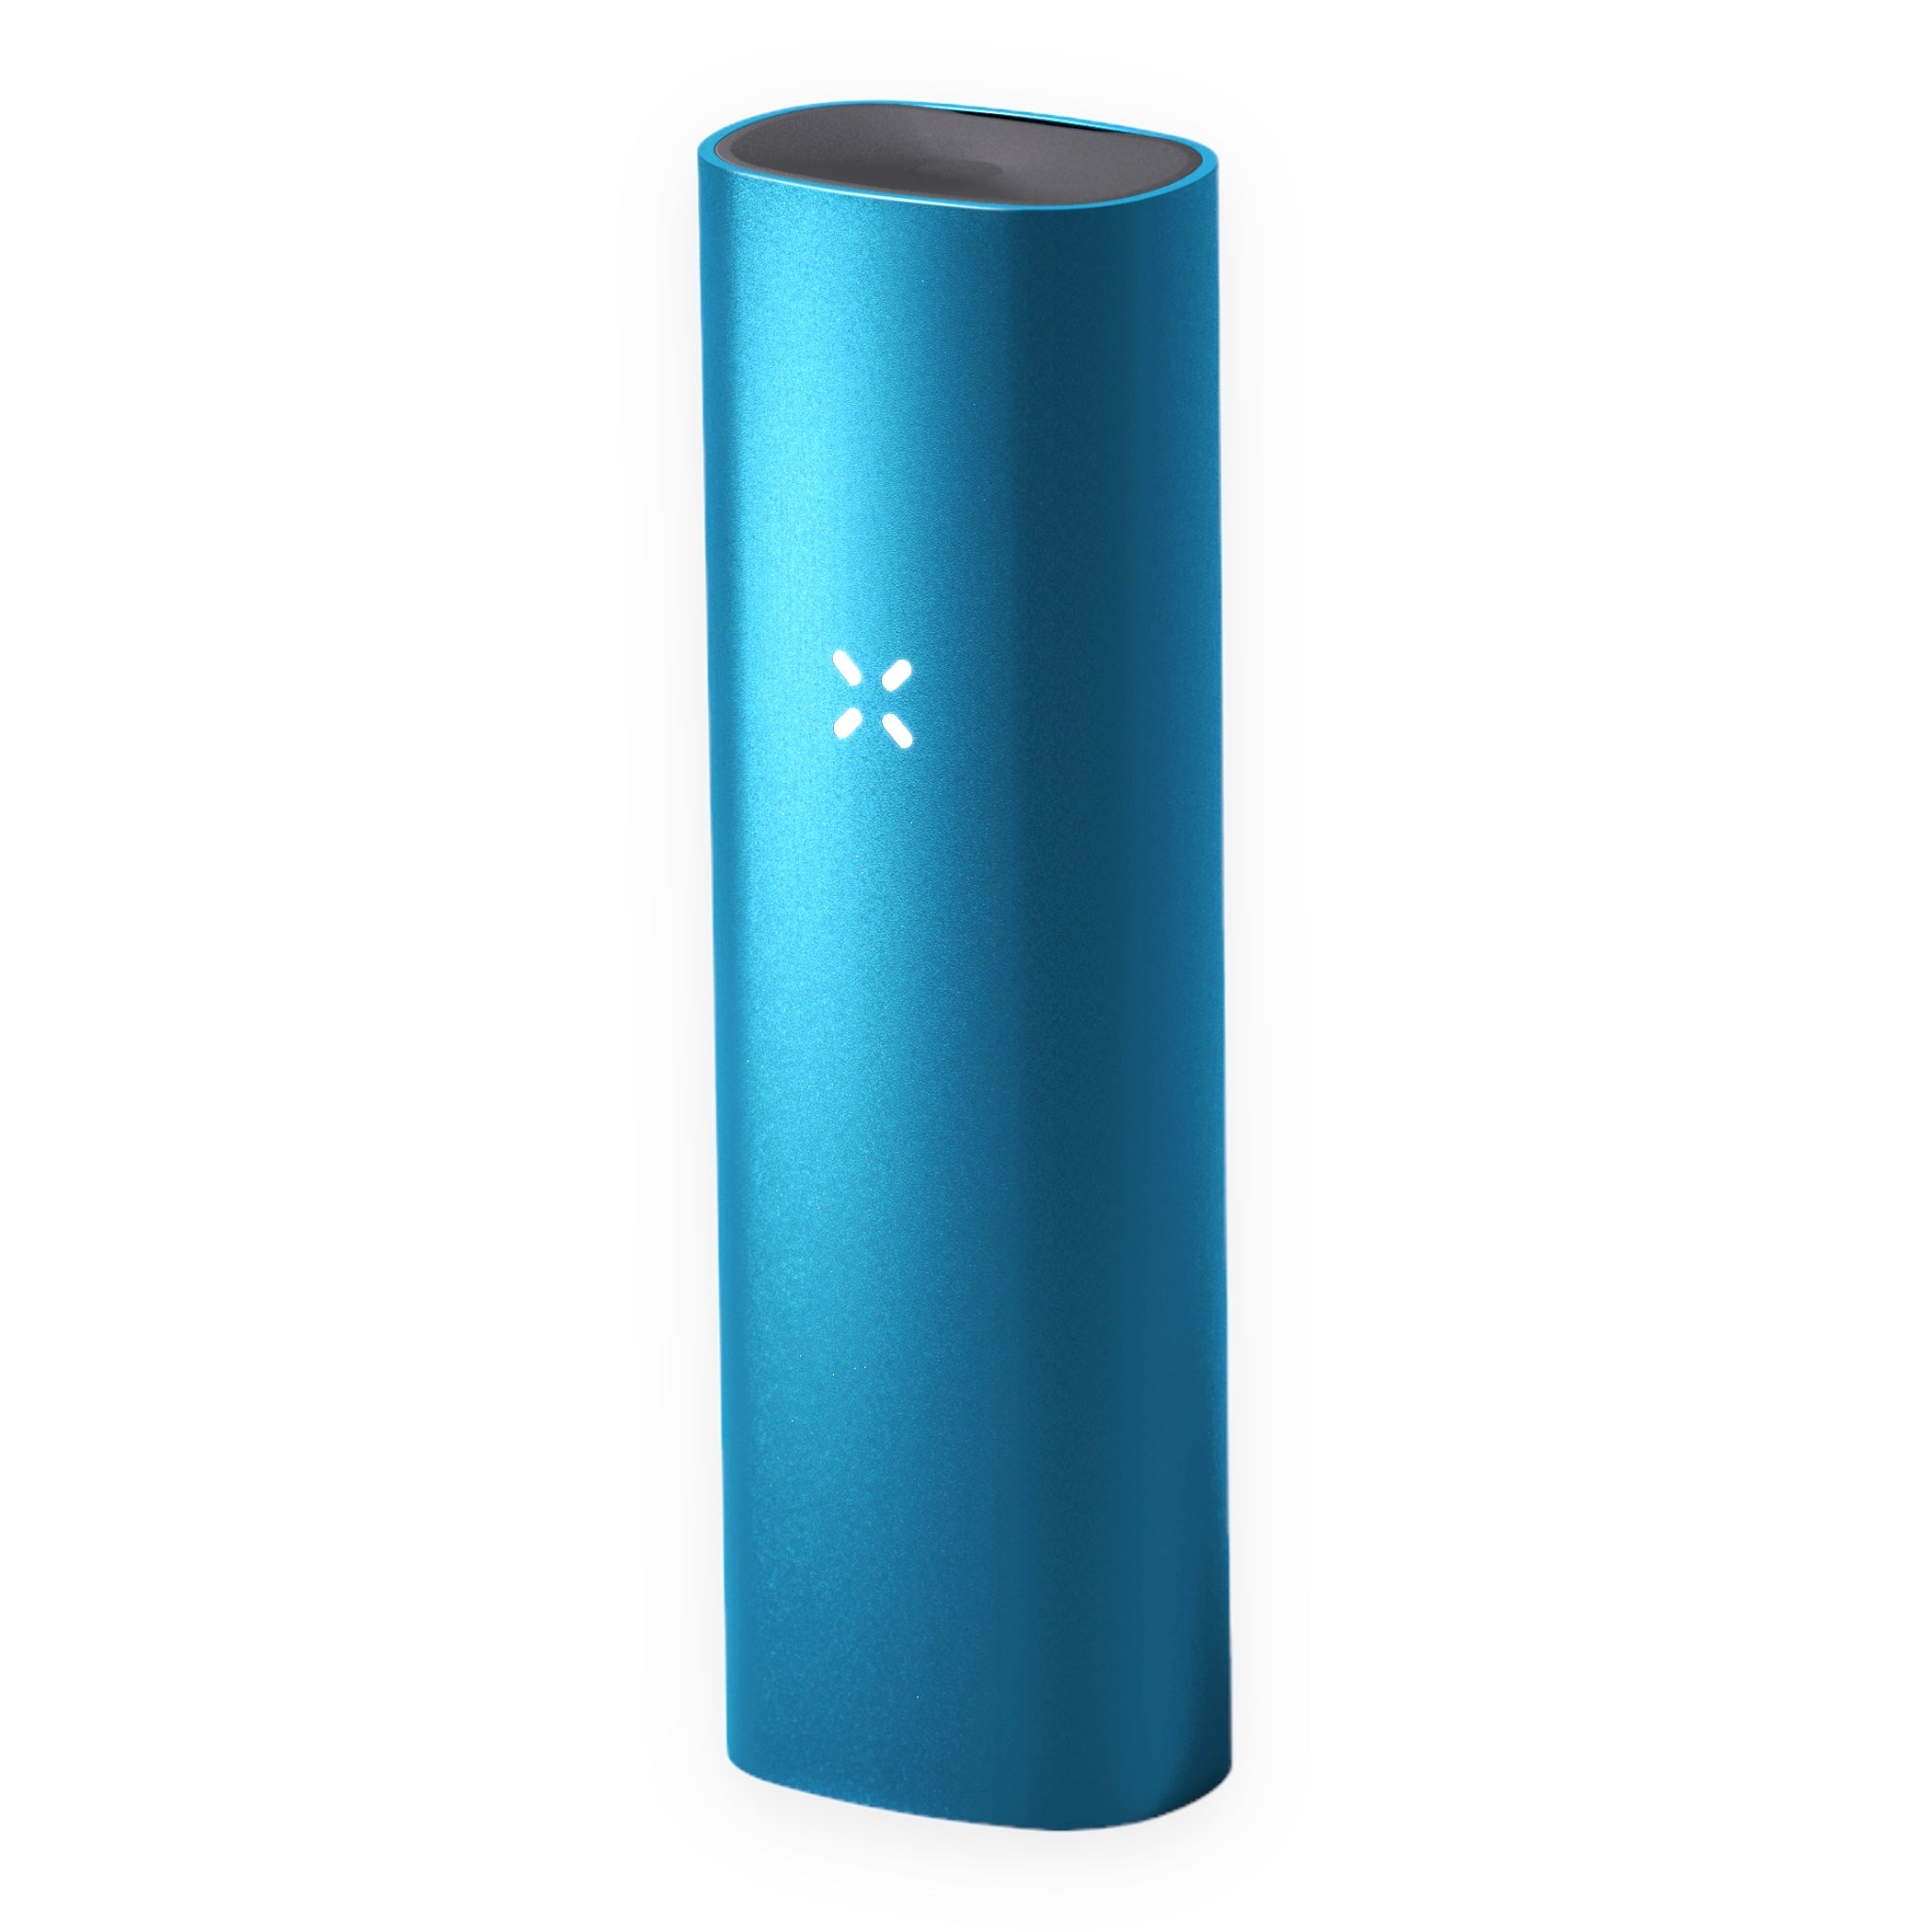 PAX 3 limited Edition Ocean Blue